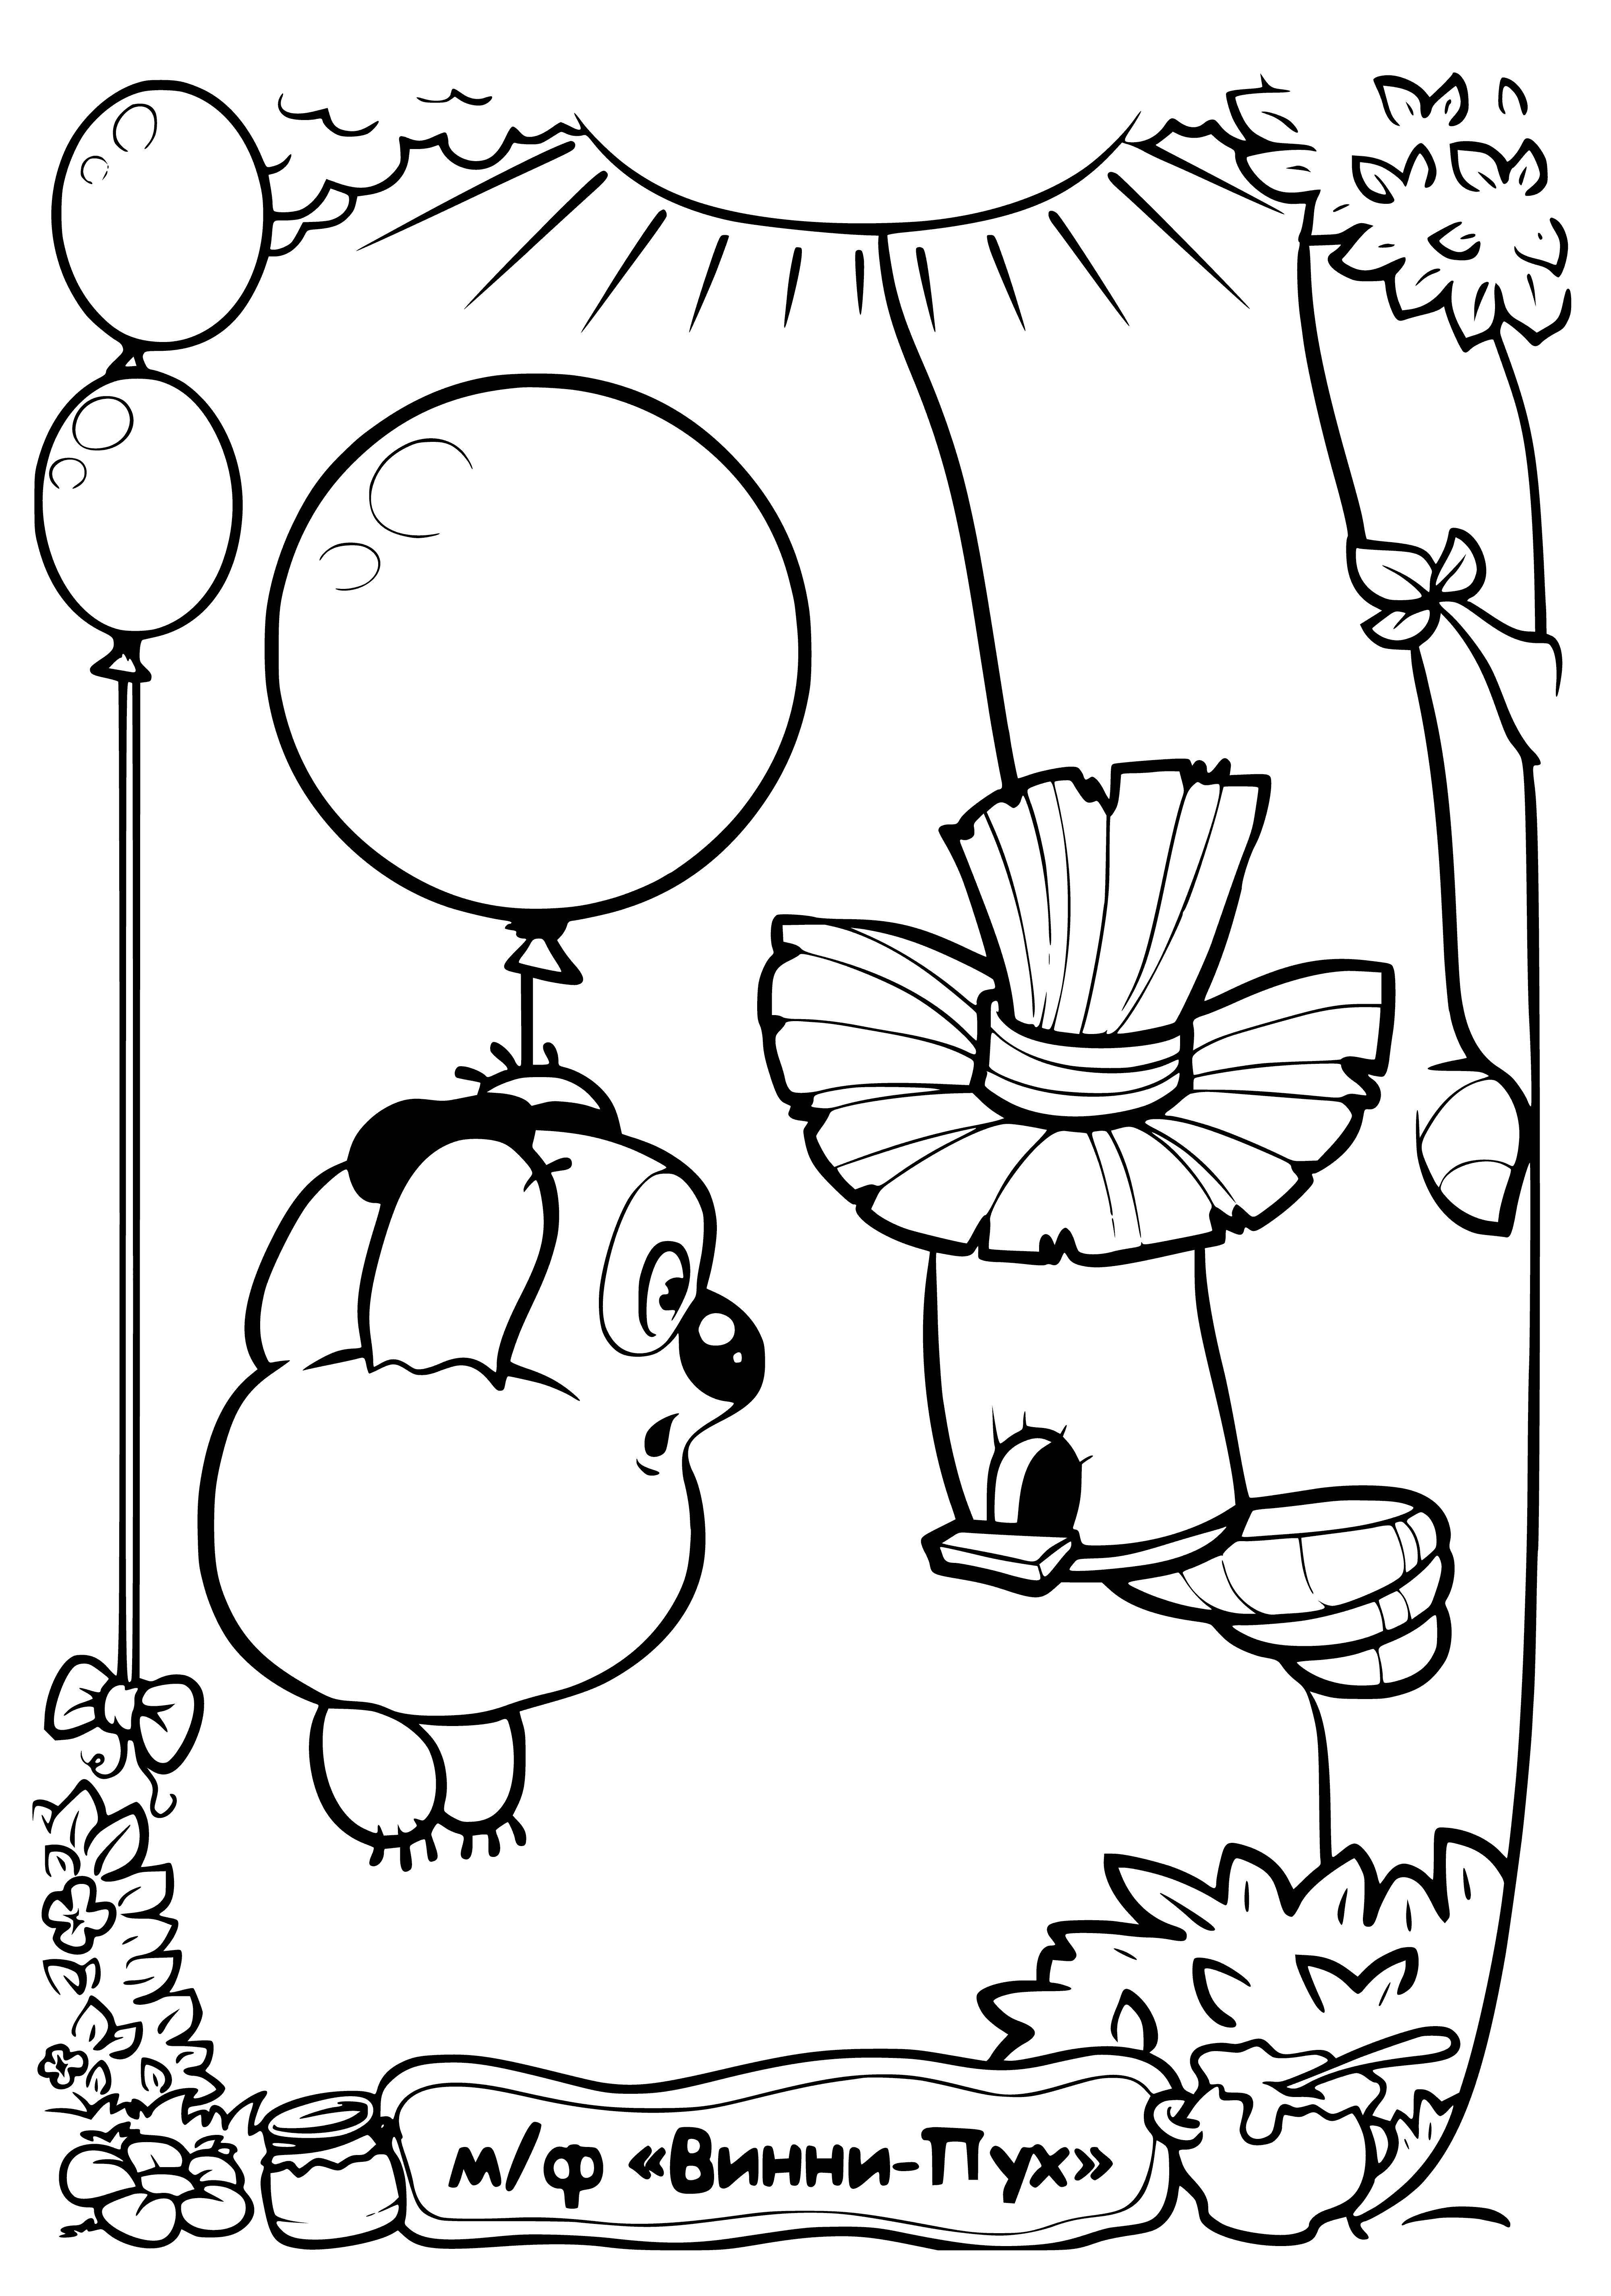 coloring page: Pooh is joyfully flying on a balloon, looking up at a blue sky with white clouds.